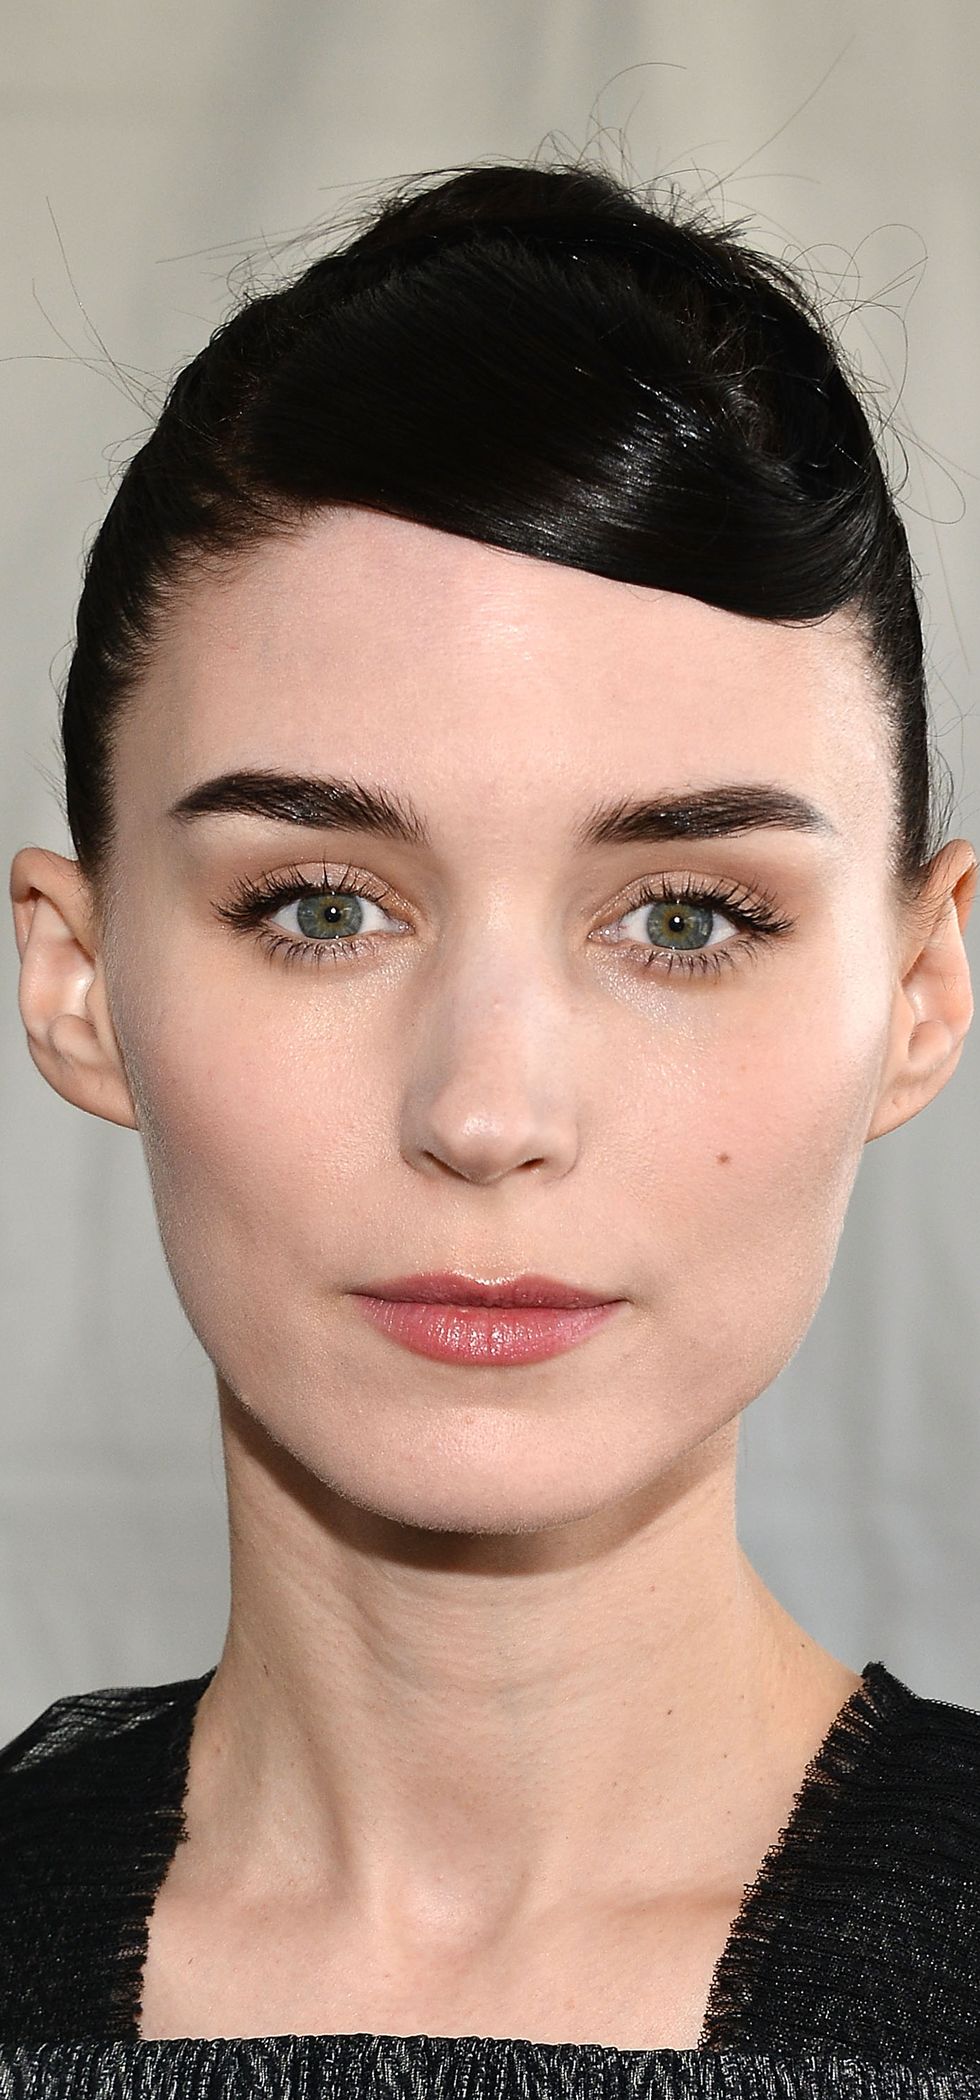 <p>Let the record show that Rooney Mara consistently does the most interesting hair, like this little cap made out of her own bangs. Think of it as another update on the Hepburn.</p>